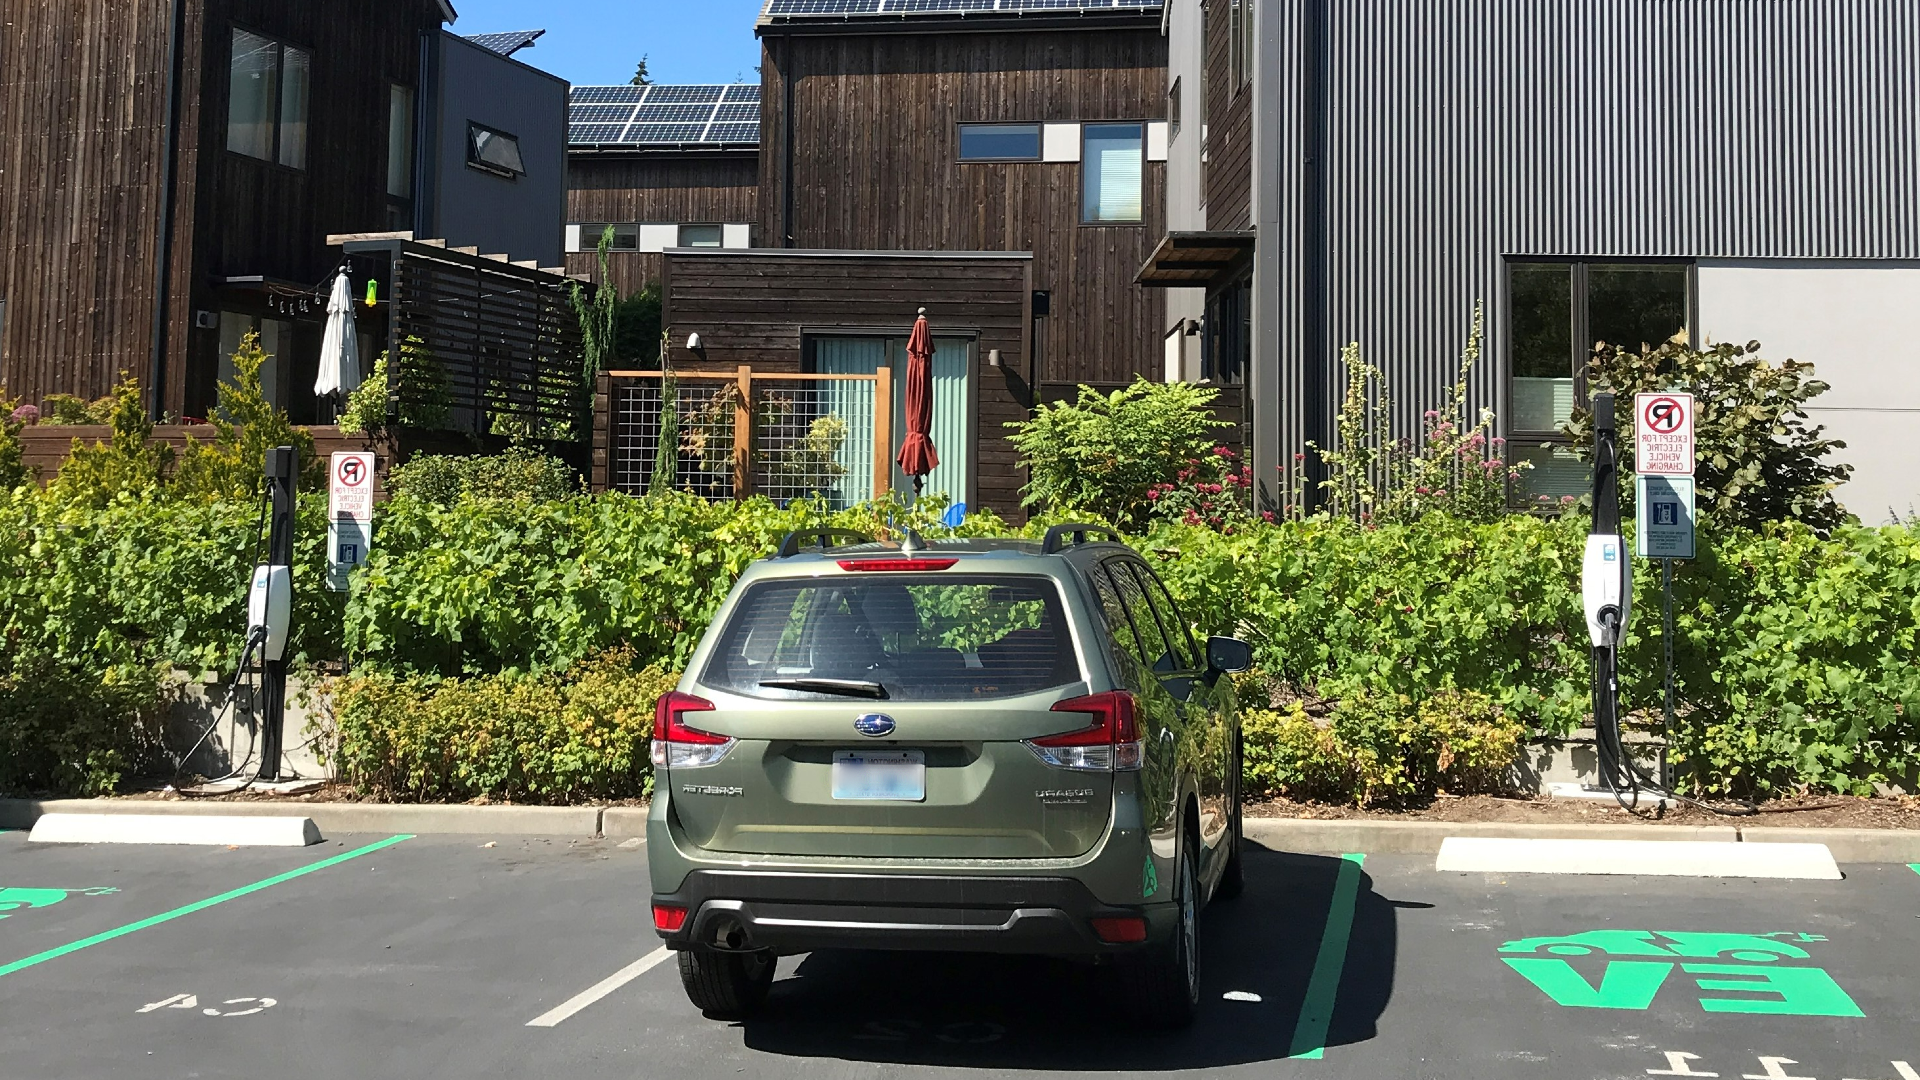 Grow Community on Bainbridge Island was one of 35 properties in our service area to receive electric vehicle charging for its tenants through our 多户收费 pilot.